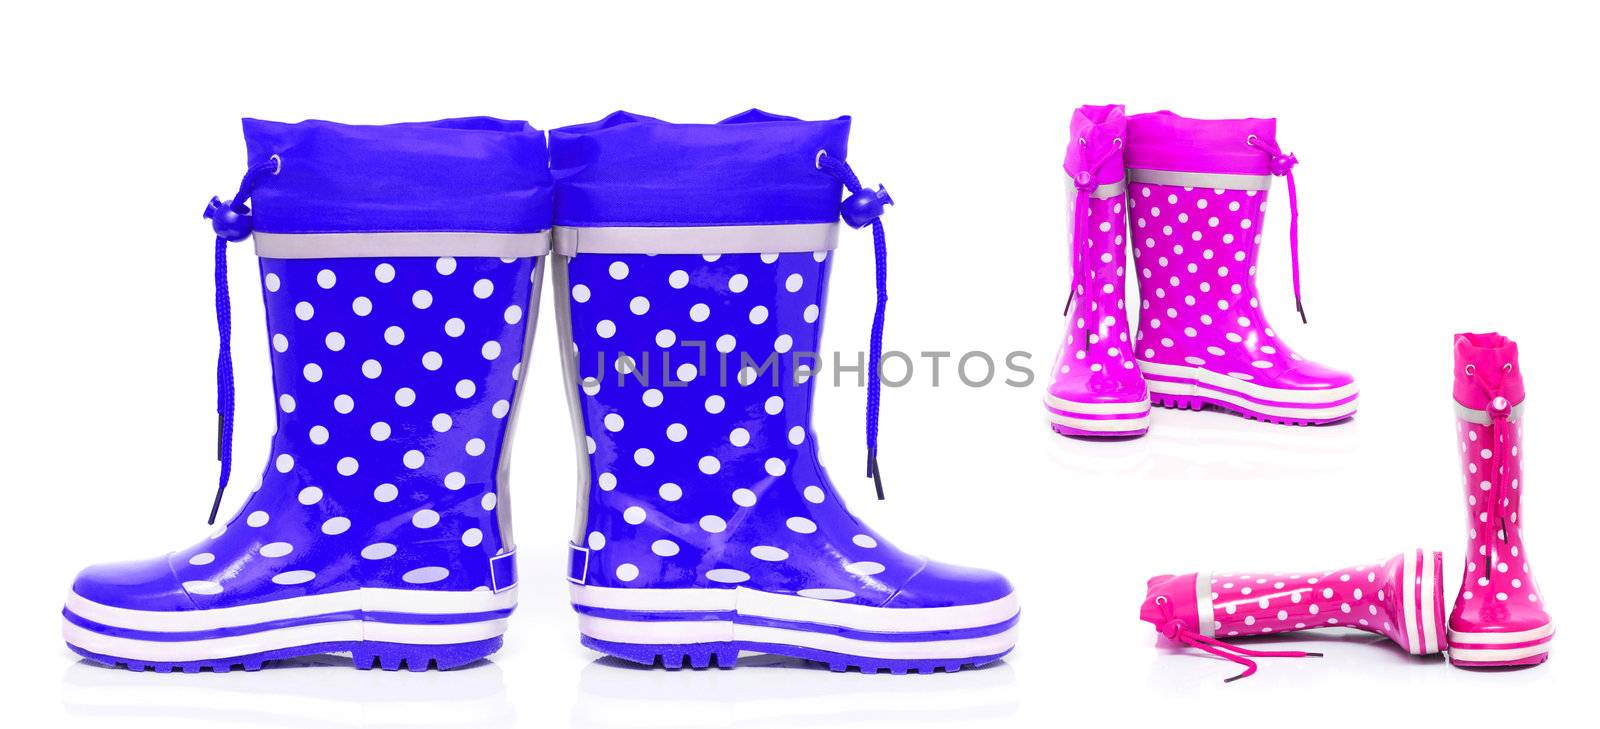 Collage of colorful rubber boots for kids isolated on white background 